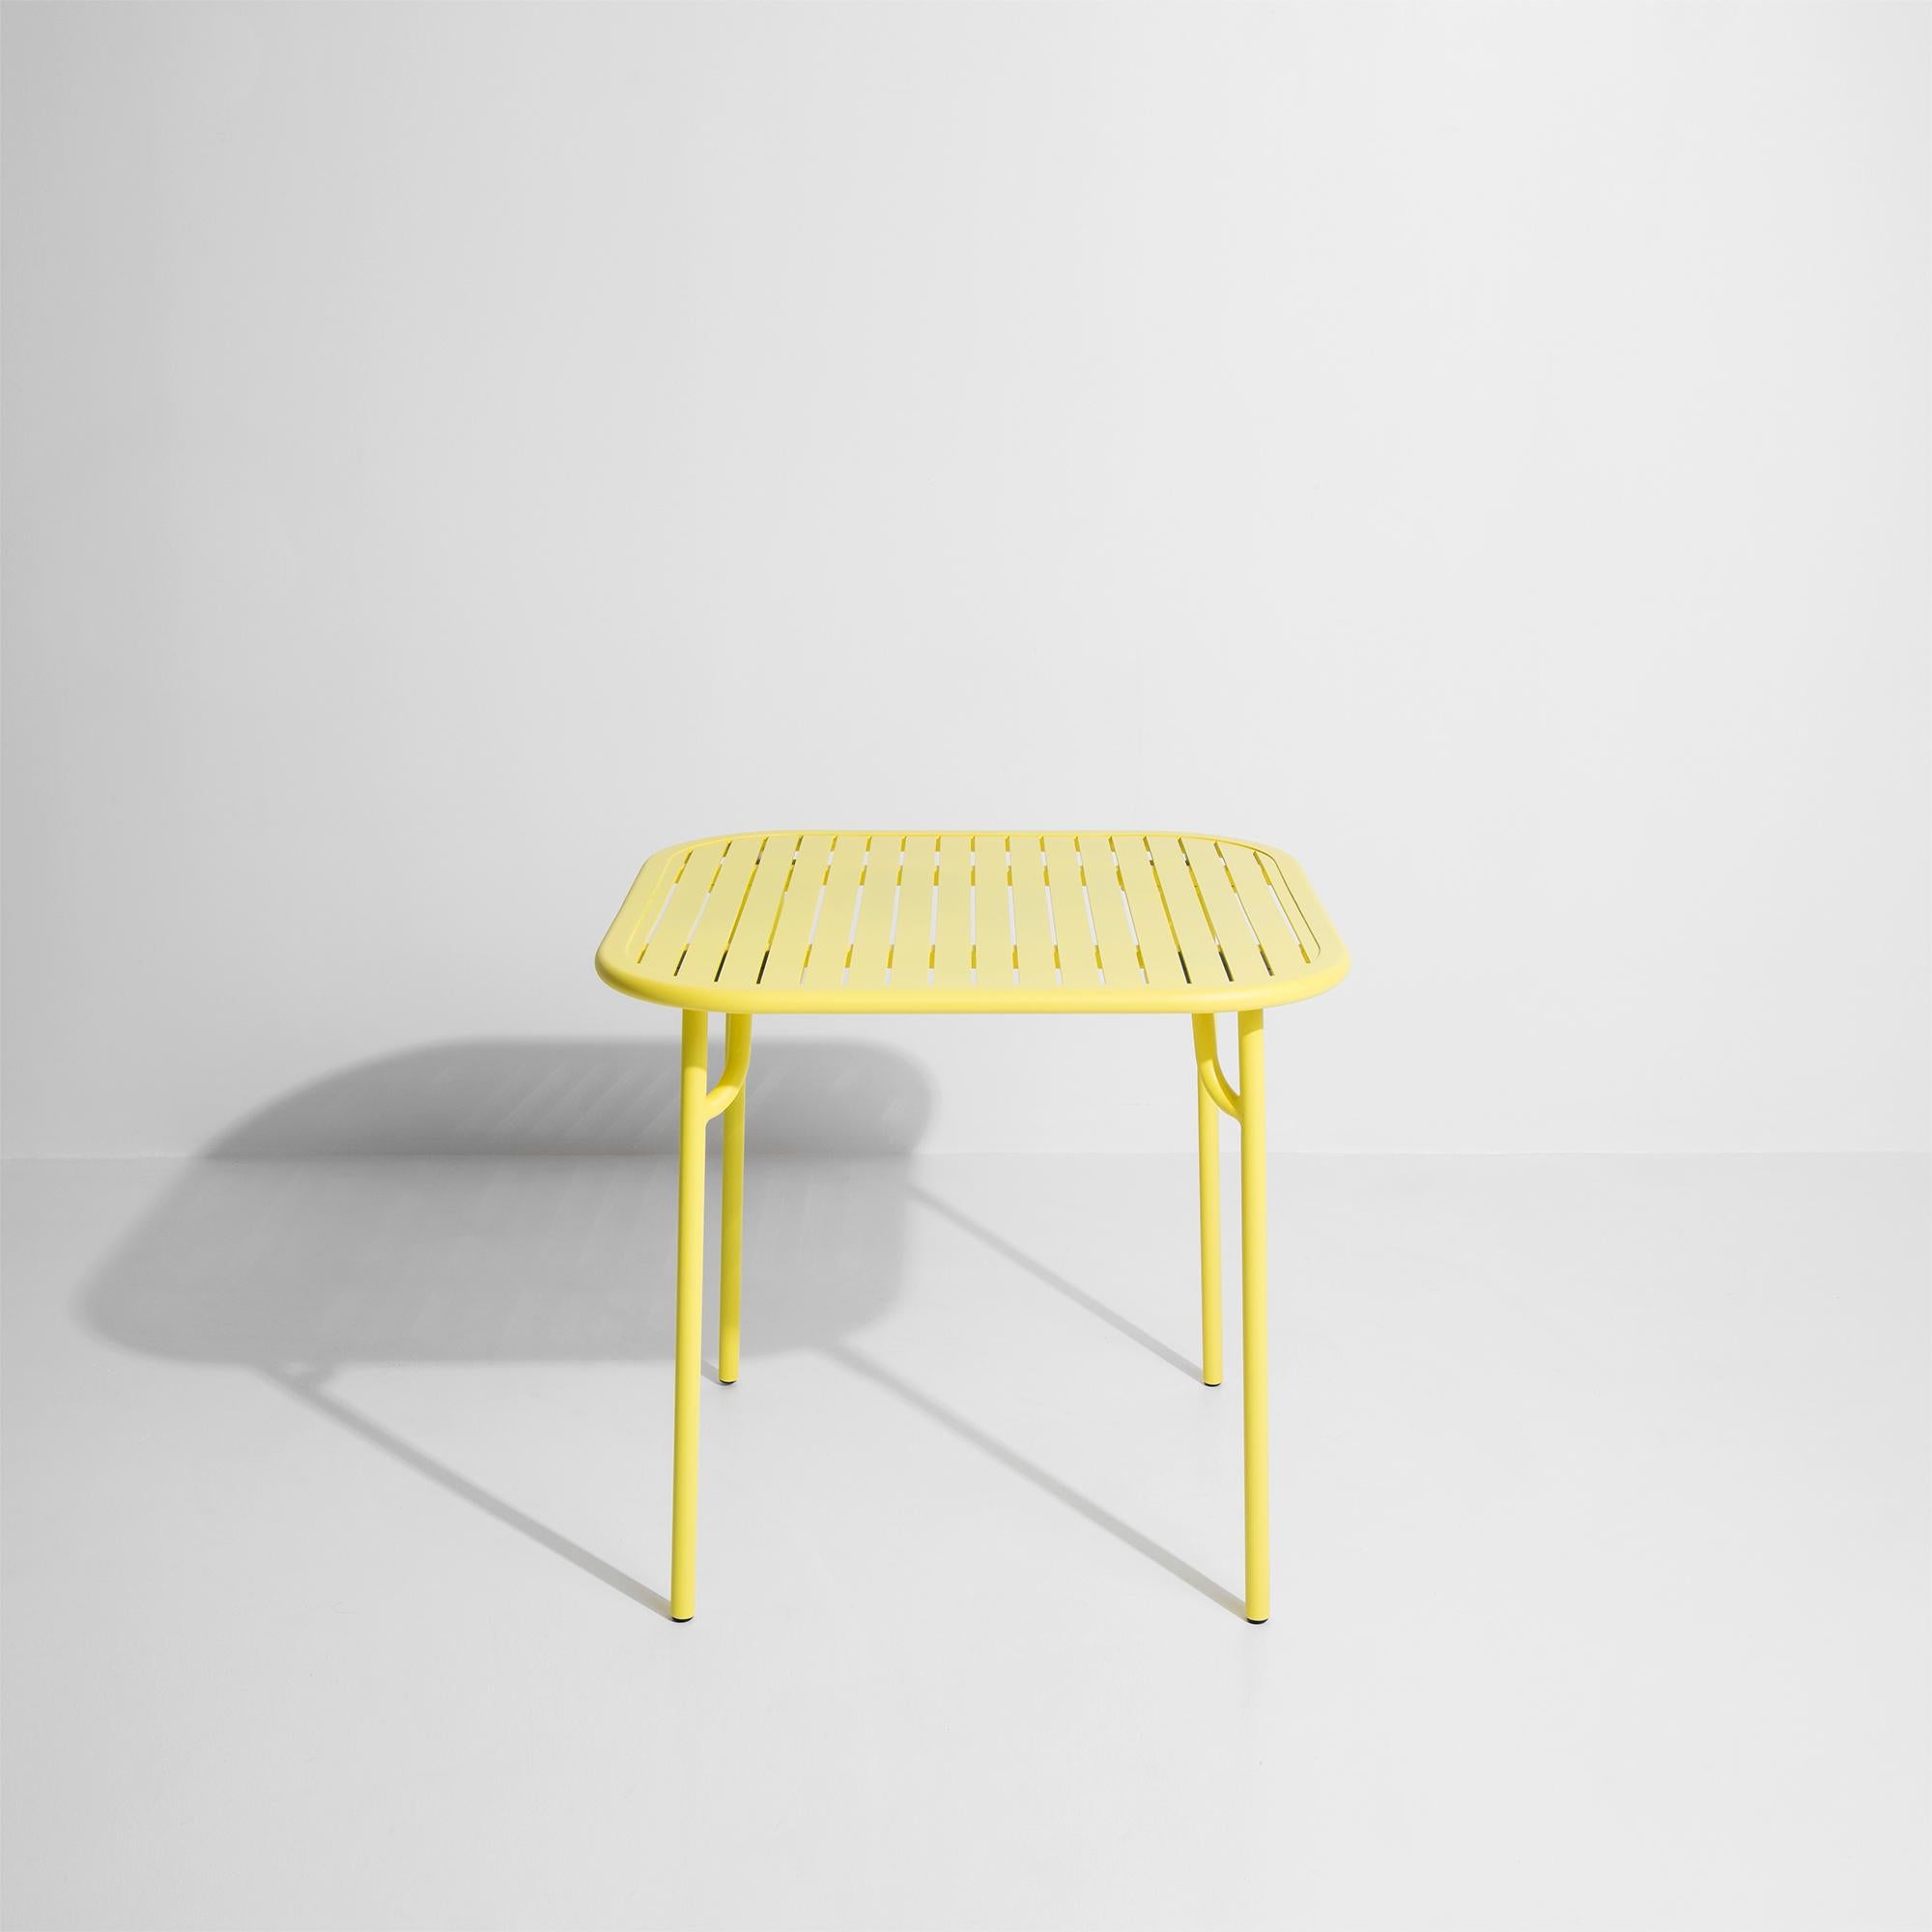 Petite Friture Week-End Square Dining Table in Yellow Aluminium with Slats by Studio BrichetZiegler, 2017

The week-end collection is a full range of outdoor furniture, in aluminium grained epoxy paint, matt finish, that includes 18 functions and